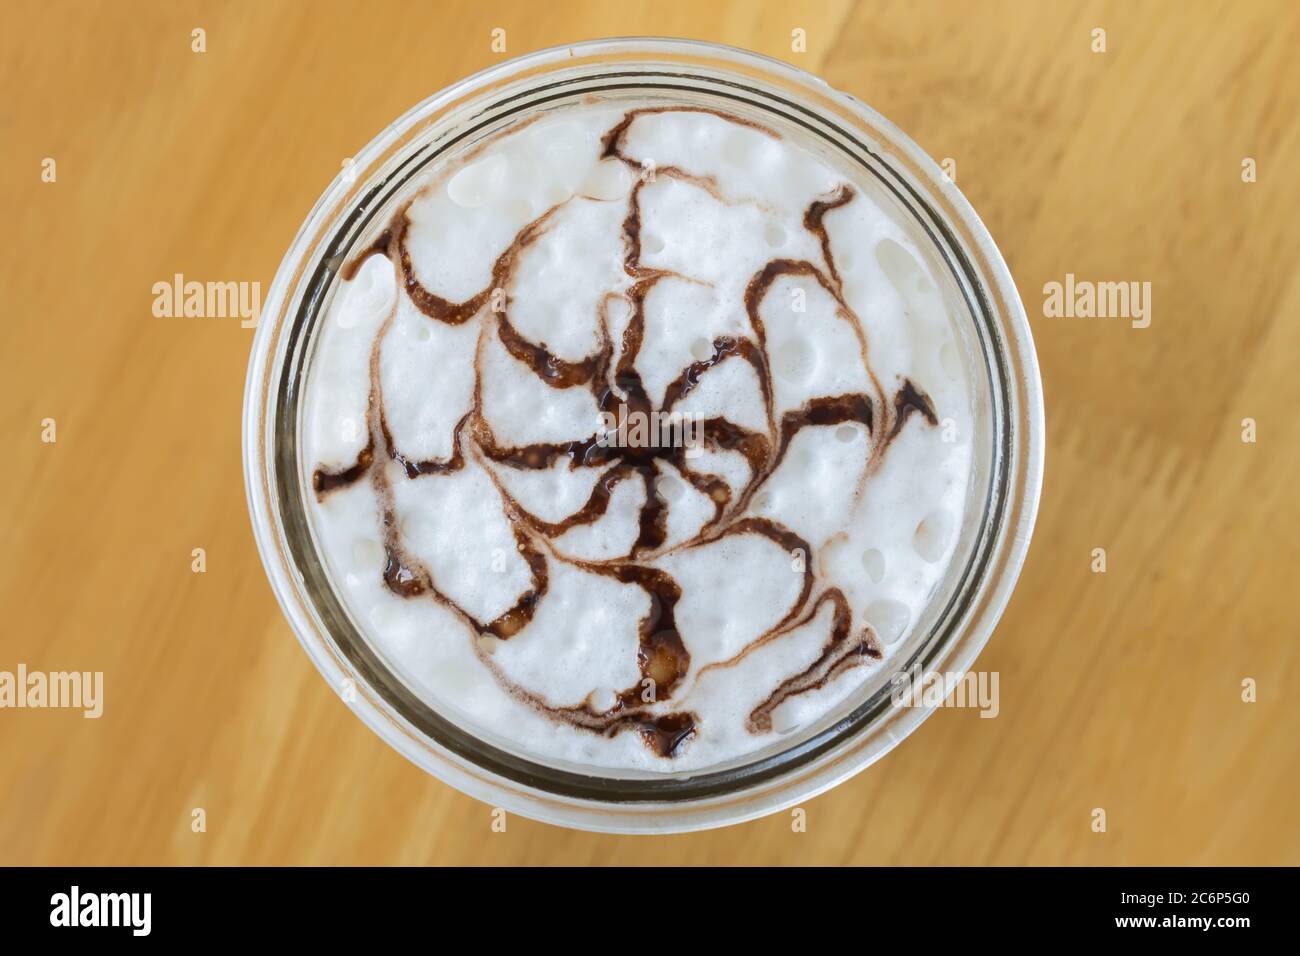 Mocha Coffee and Chocolate Art on Frothing Milk at Center Frame on Wood Background Stock Photo